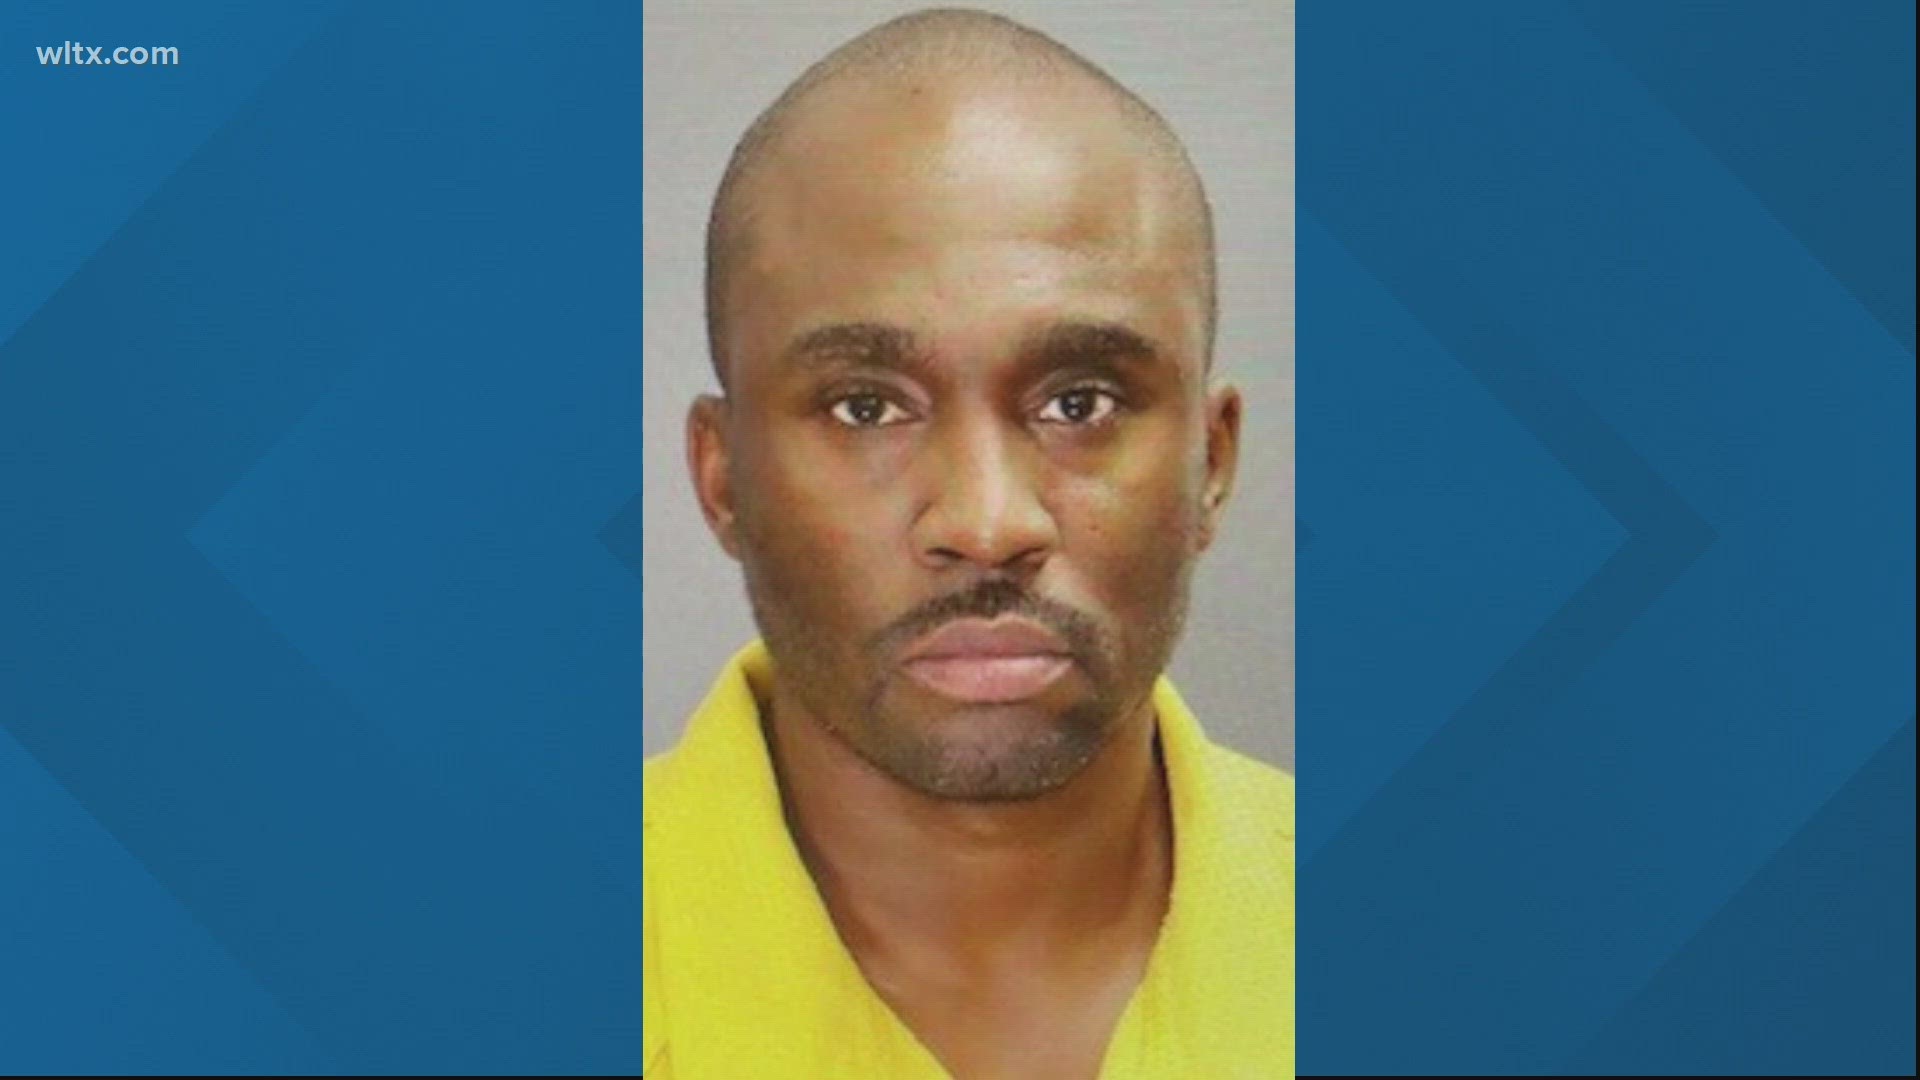 A South Carolina convicted murderer whose early release ignited controversy is now back behind bars at a state prison.